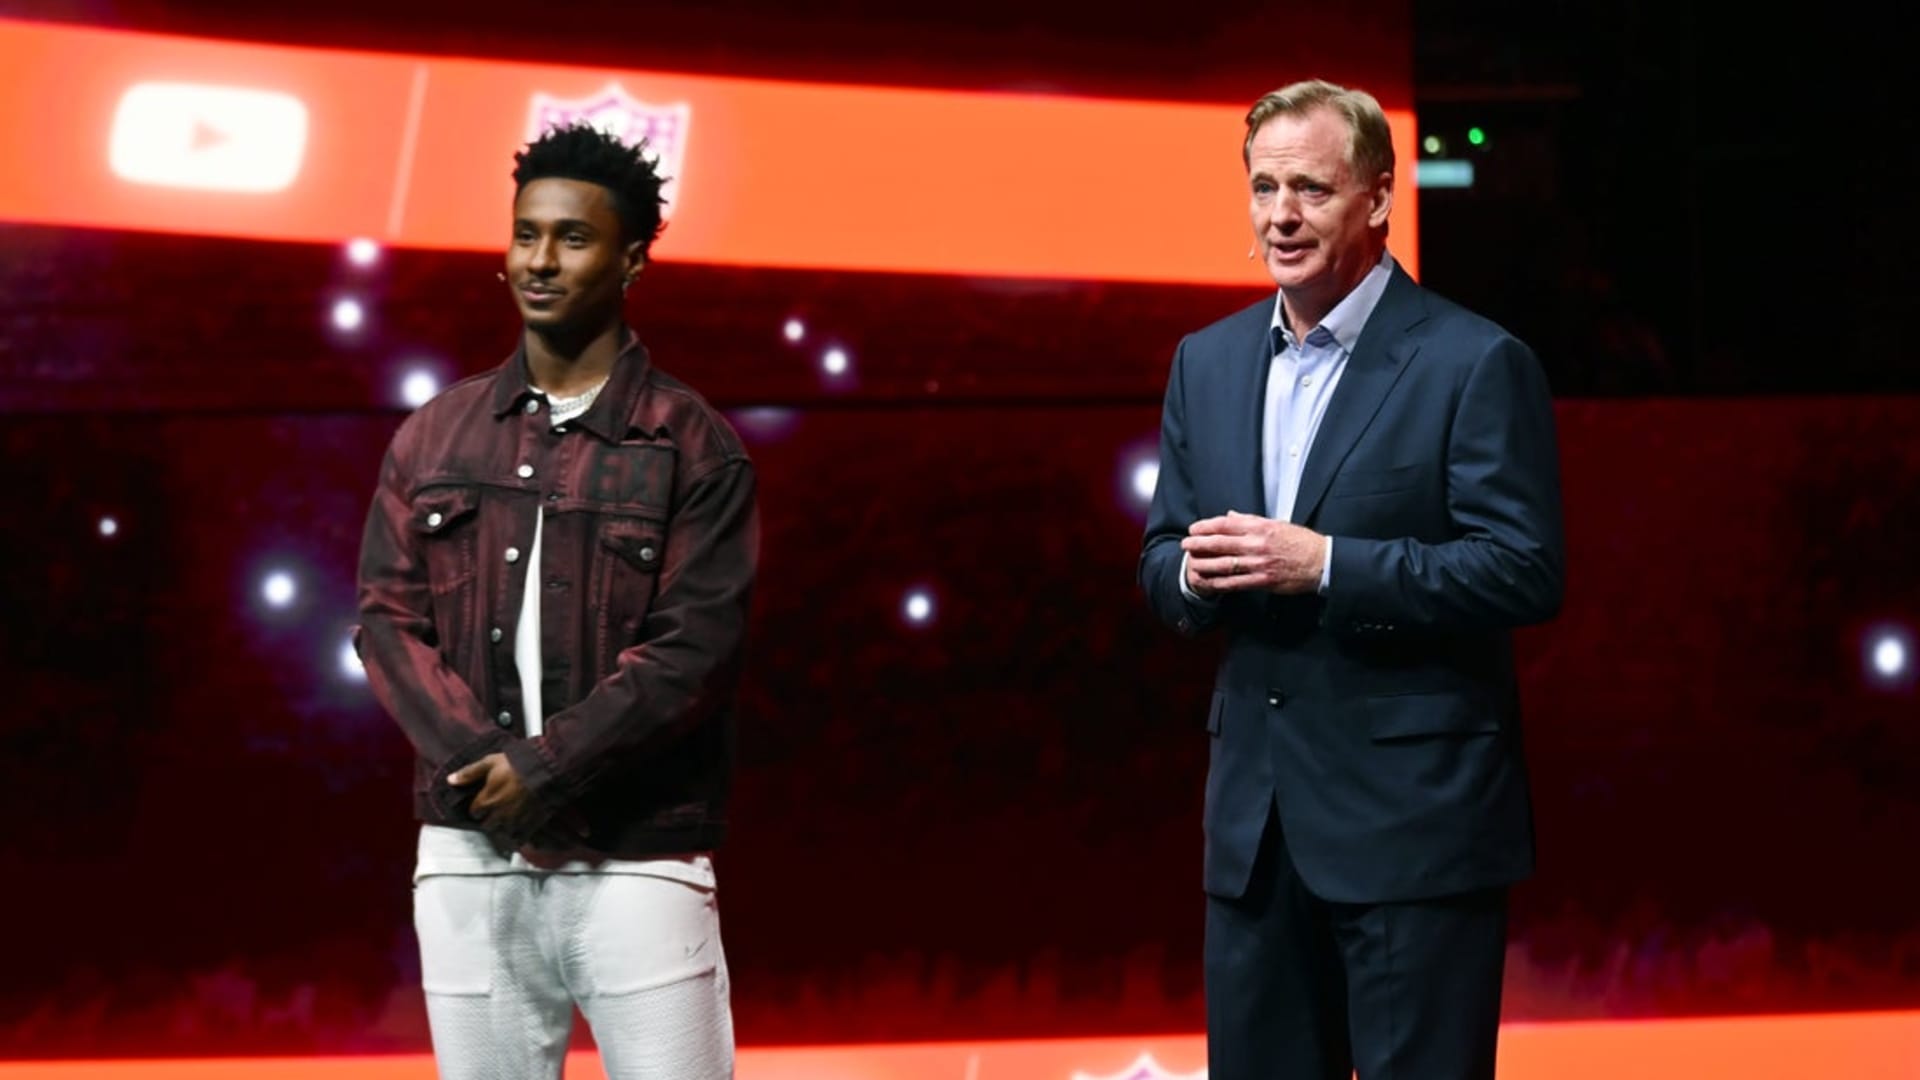 YouTube stars help NFL bring in more viewers, league says